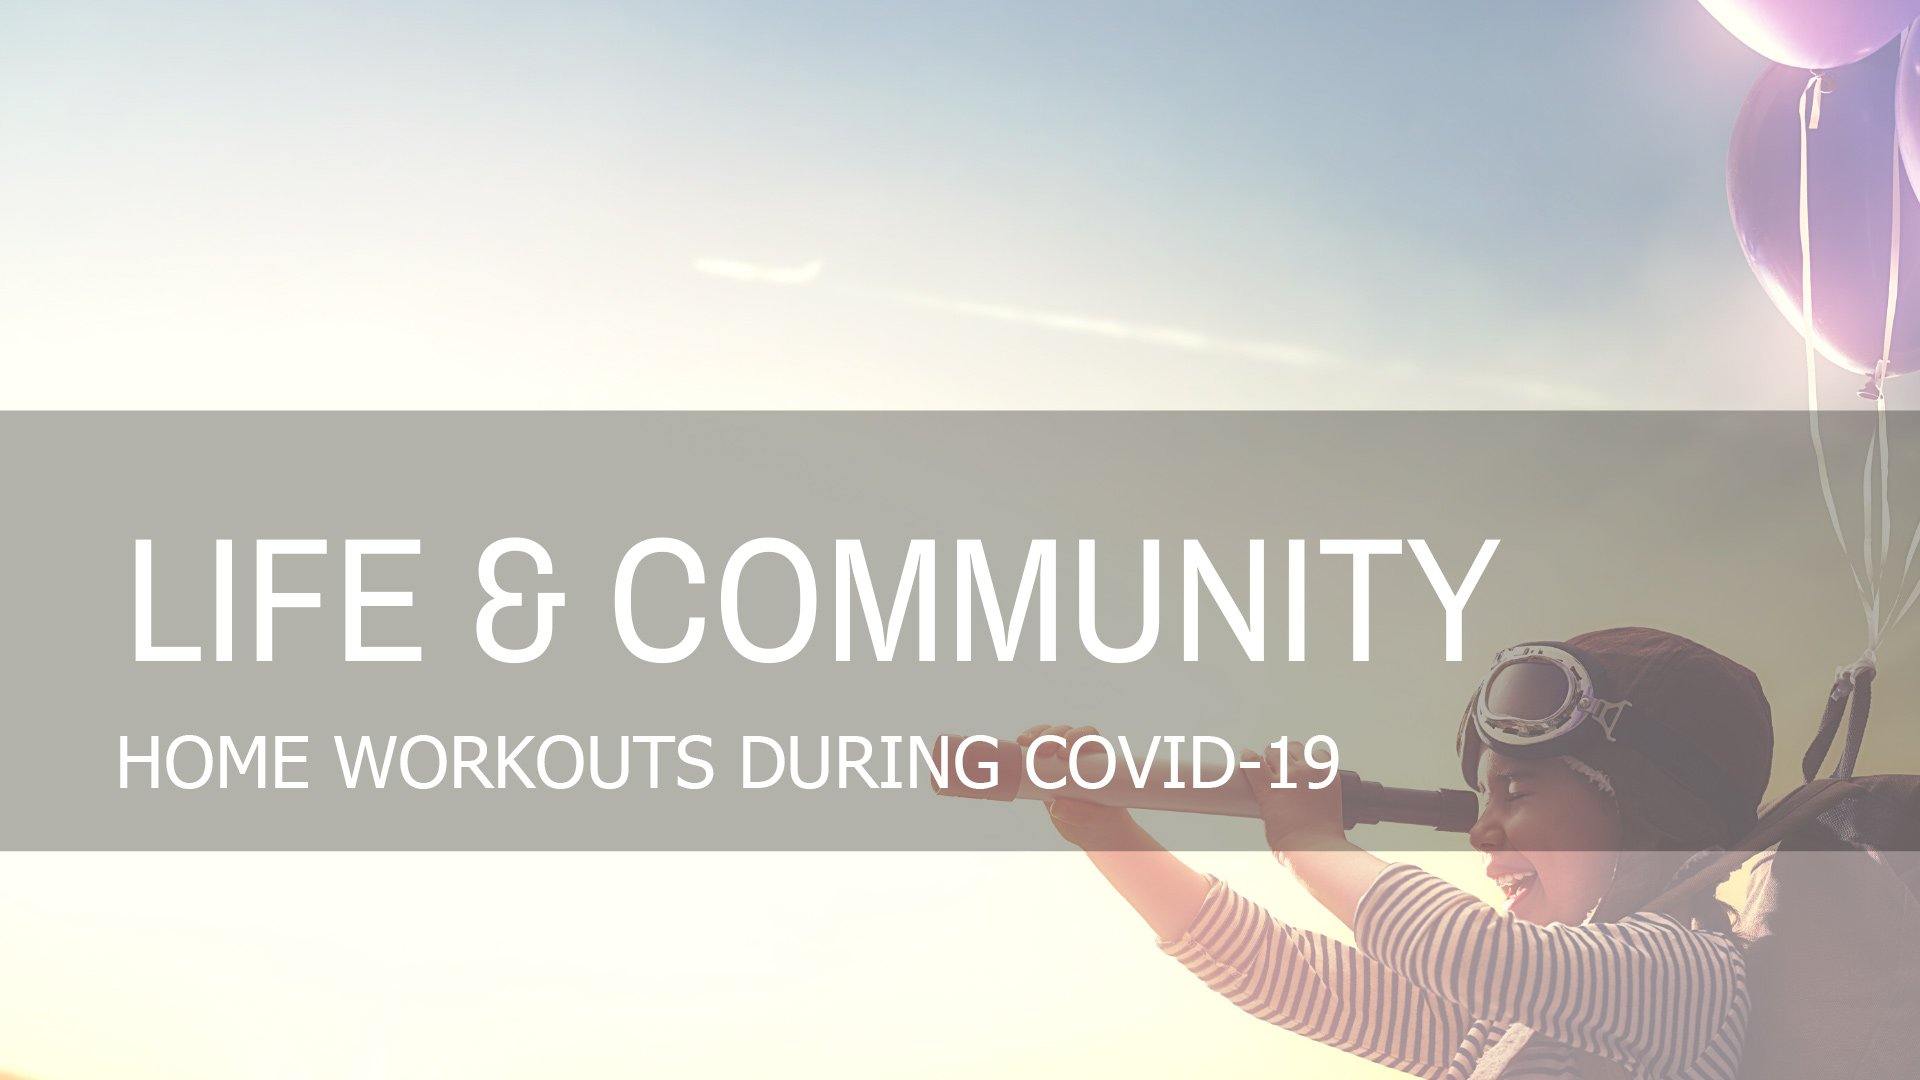 How to Work Out at Home During COVID-19